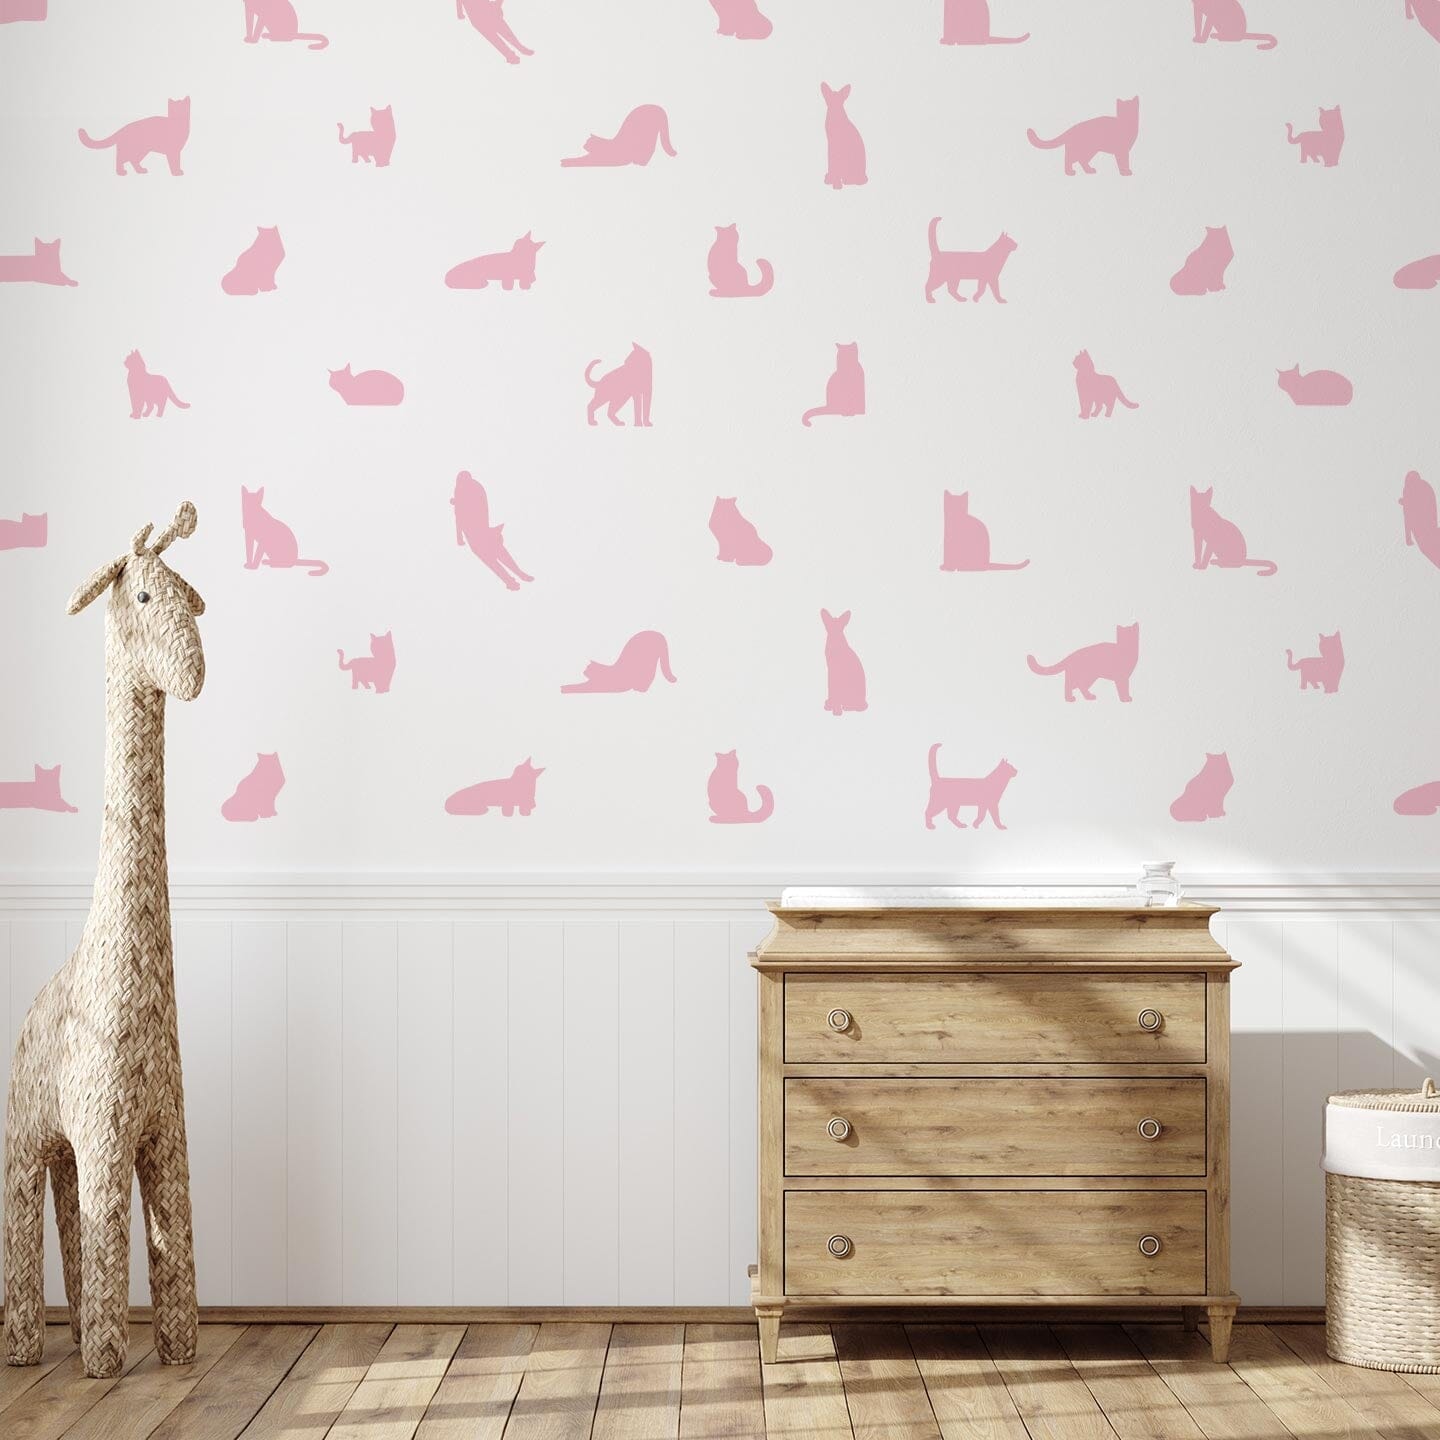 Cat Silhouette Wall Decals Decals Urbanwalls Soft Pink 